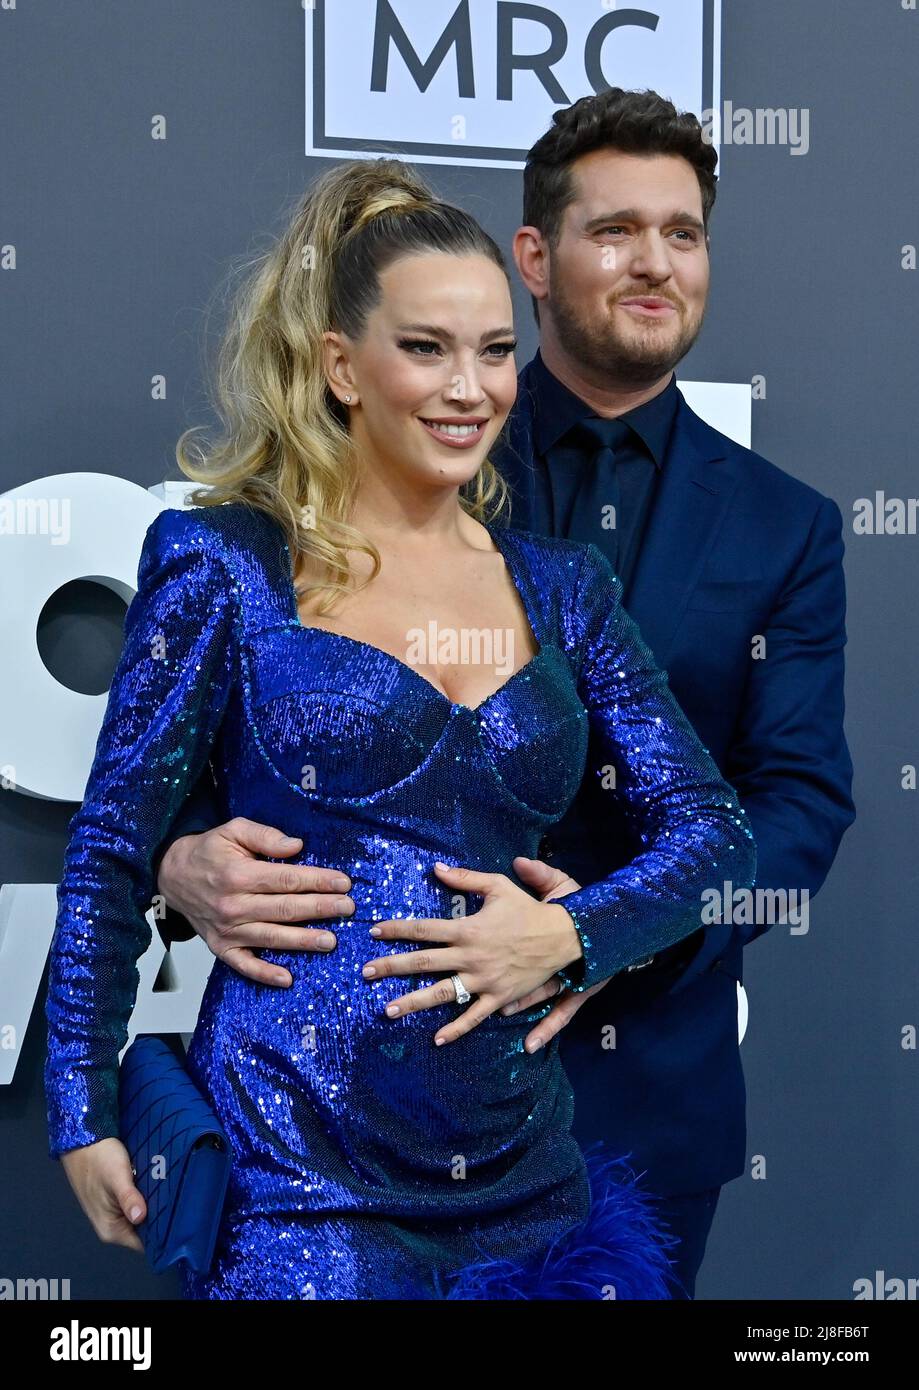 Las Vegas, United States. 15th May, 2022. Luisana Lopilato and Michael Bublé attend the annual Billboard Music Awards held at the MGM Grand Garden Arena in Las Vegas, Nevada on May 15, 2022. Photo by Jim Ruymen/UPI Credit: UPI/Alamy Live News Stock Photo